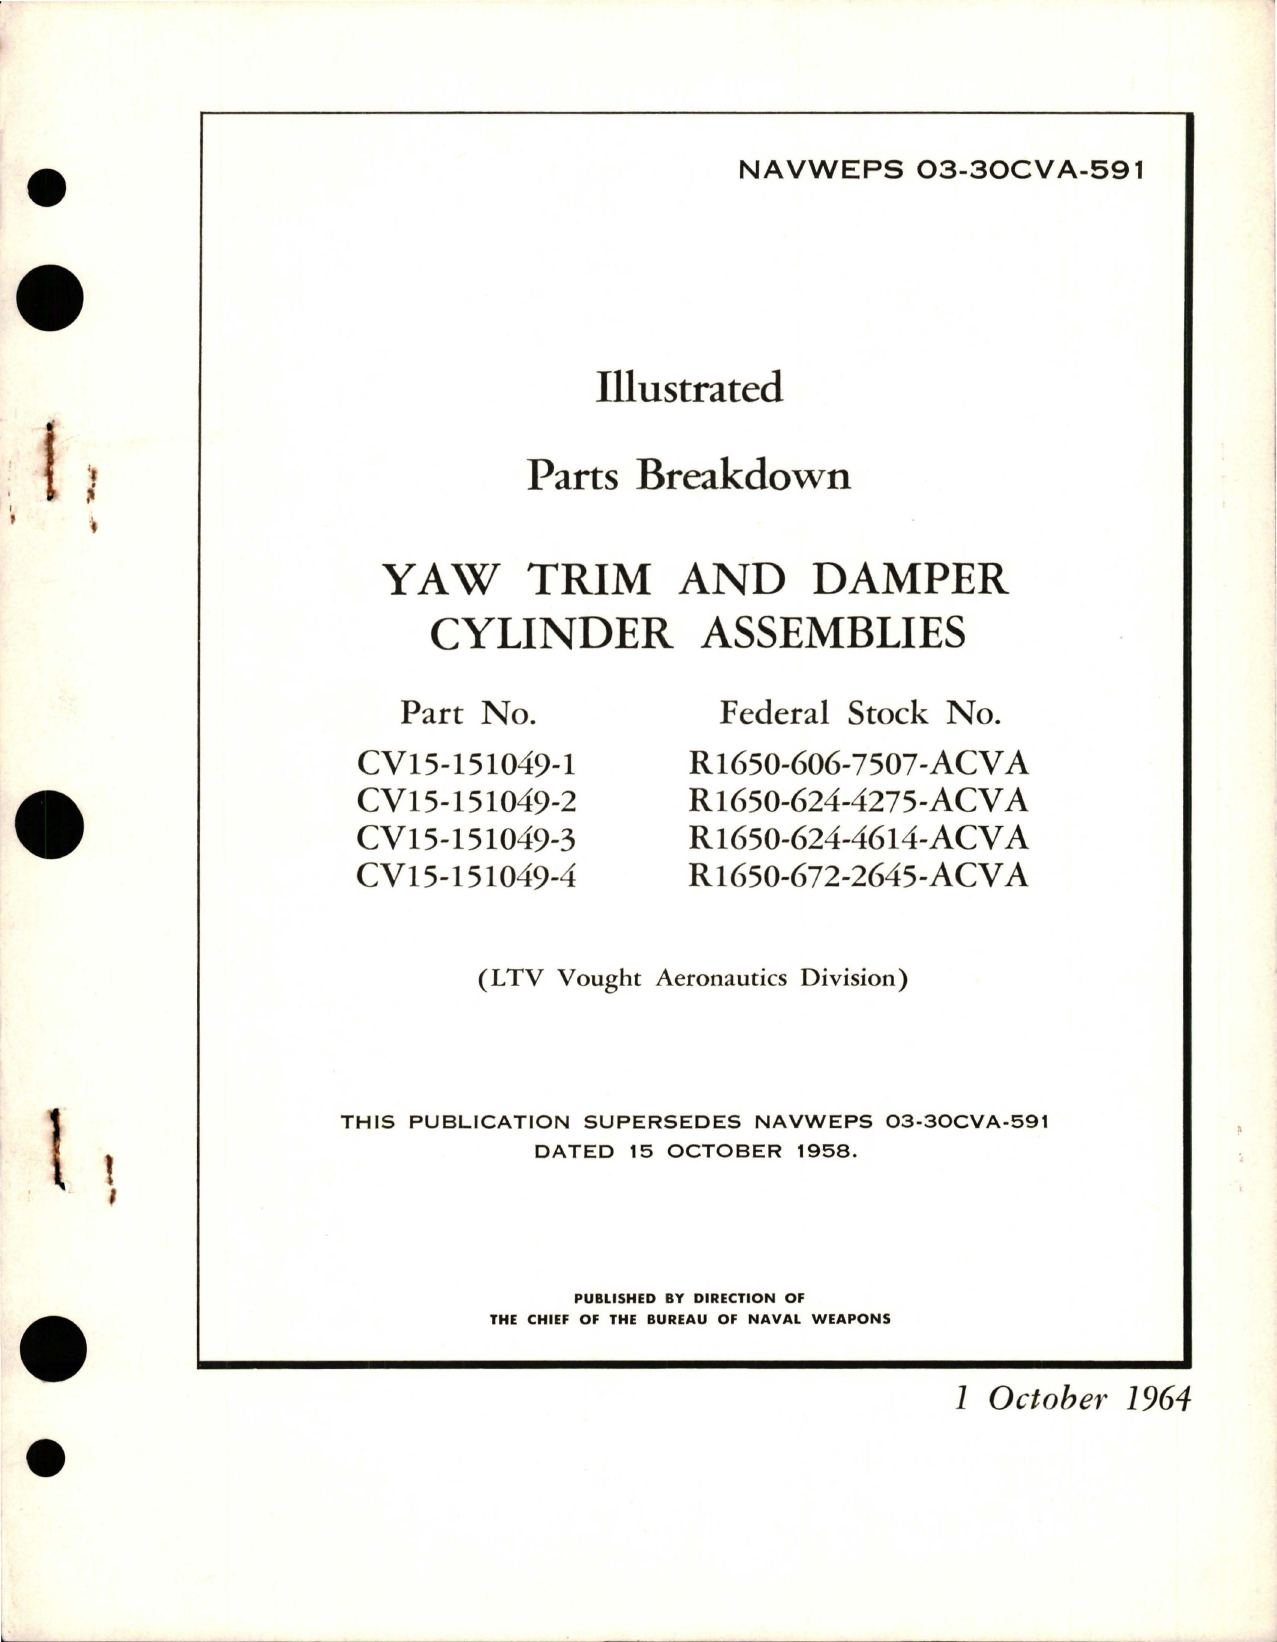 Sample page 1 from AirCorps Library document: Illustrated Parts Breakdown for Yaw Trim and Damper Cylinder Assemblies - Parts CV15-151049-1, CV15-151049-2, CV15-151049-3, and CV15-151049-4